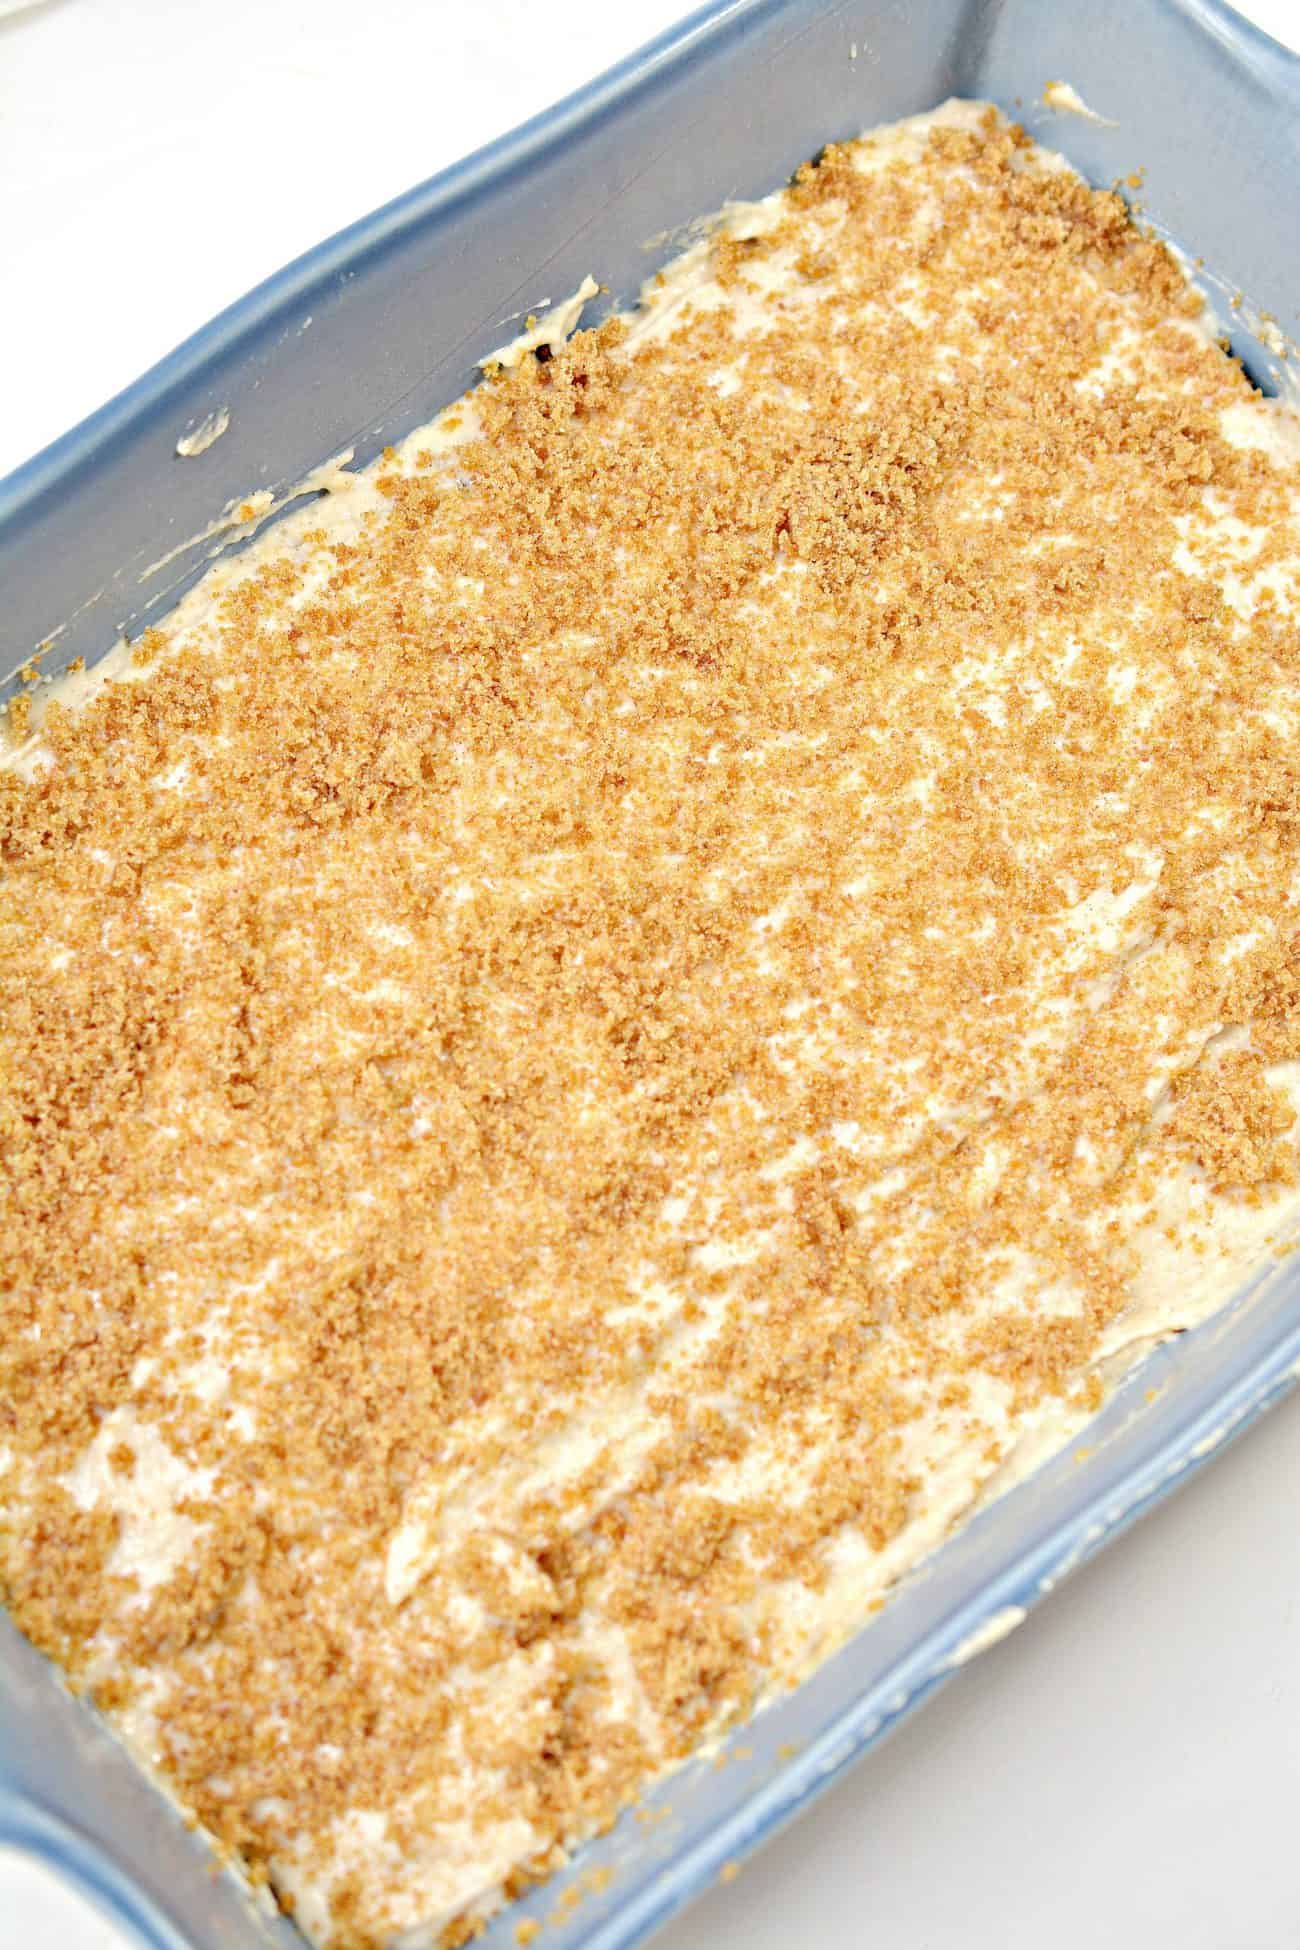 Layer the last half of the cake batter on top of the apple filling, and top with the remaining brown sugar mixture.